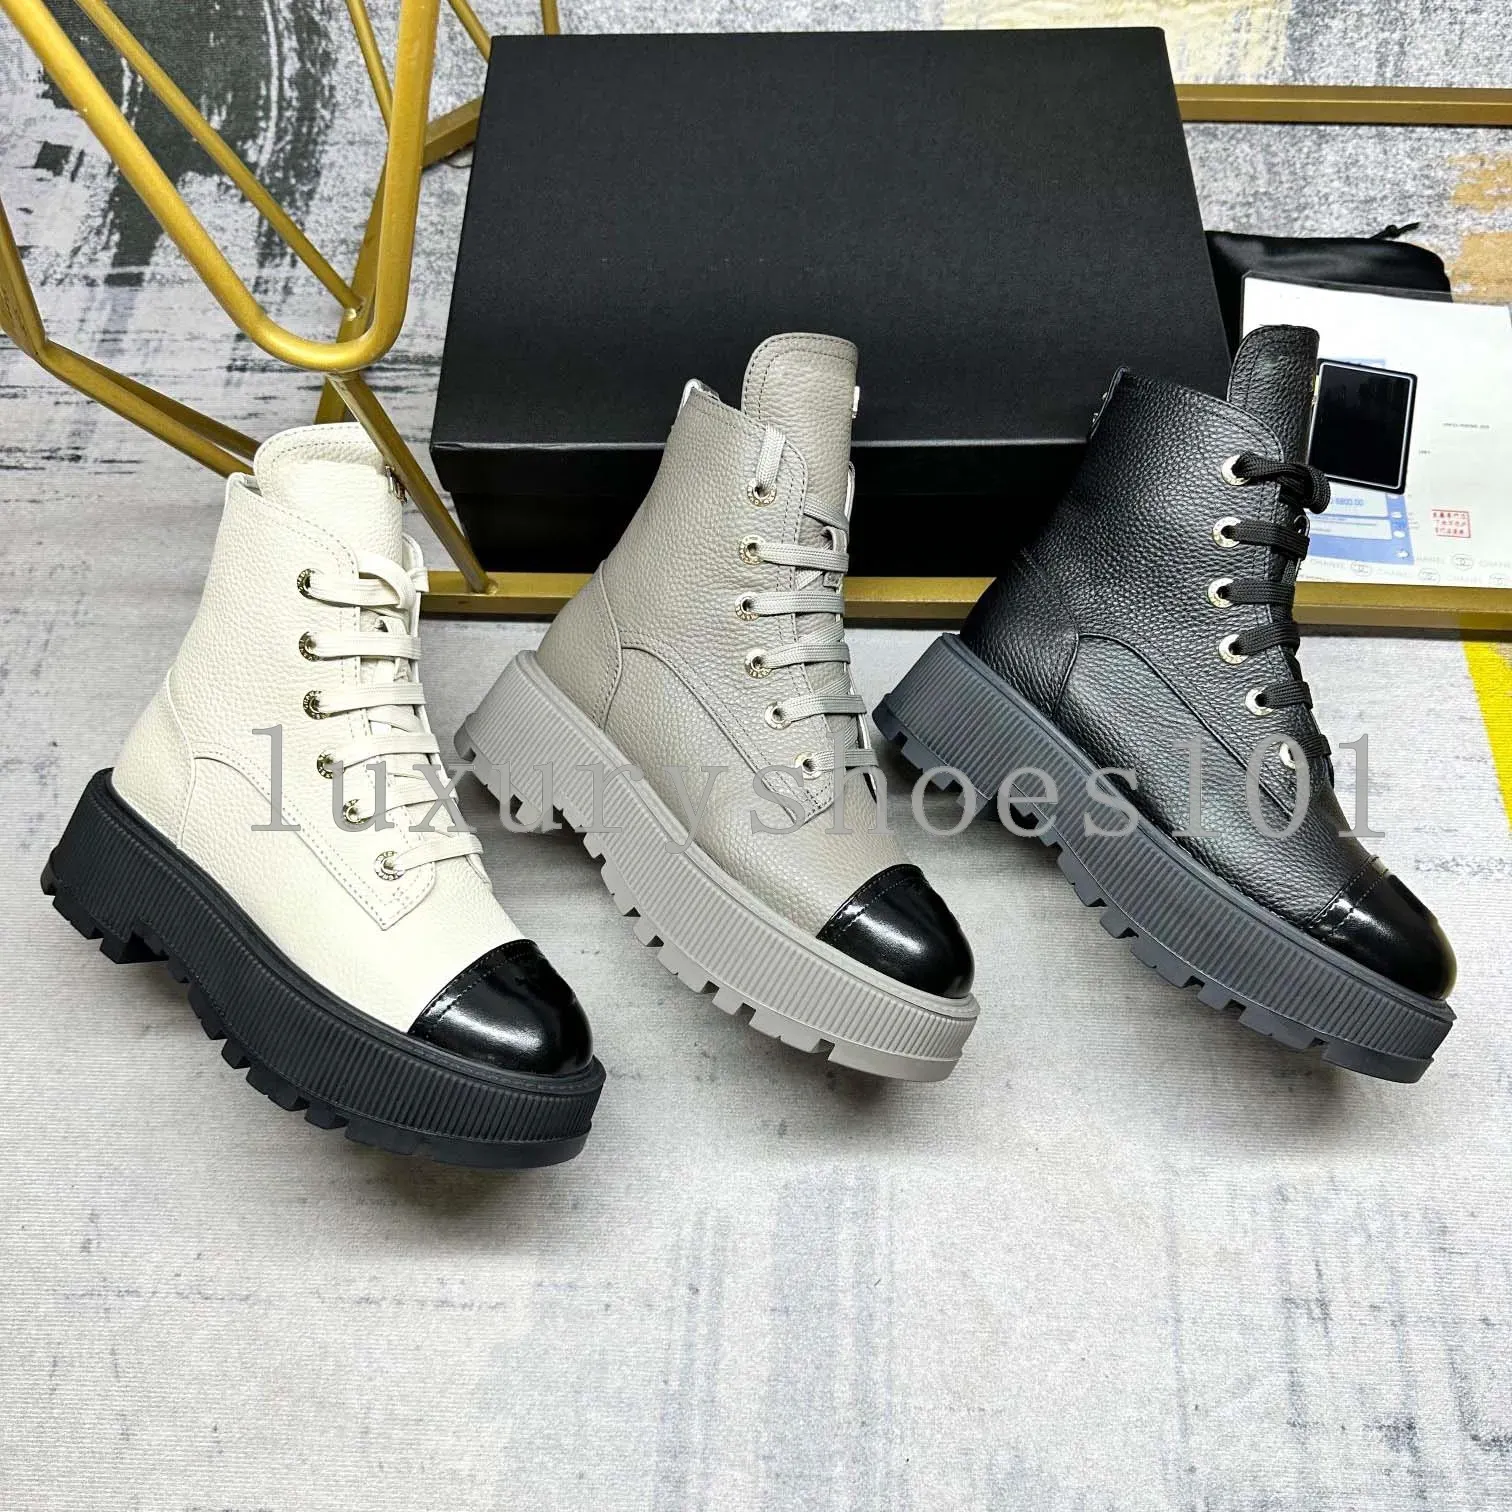 Designer Boots Polished Leather Chelsea Ankle Boots Elasticity Motorcycle Boots Platform Wedges Slip-On Round Toe Women Outdoor Shoes Luxury Flat booties